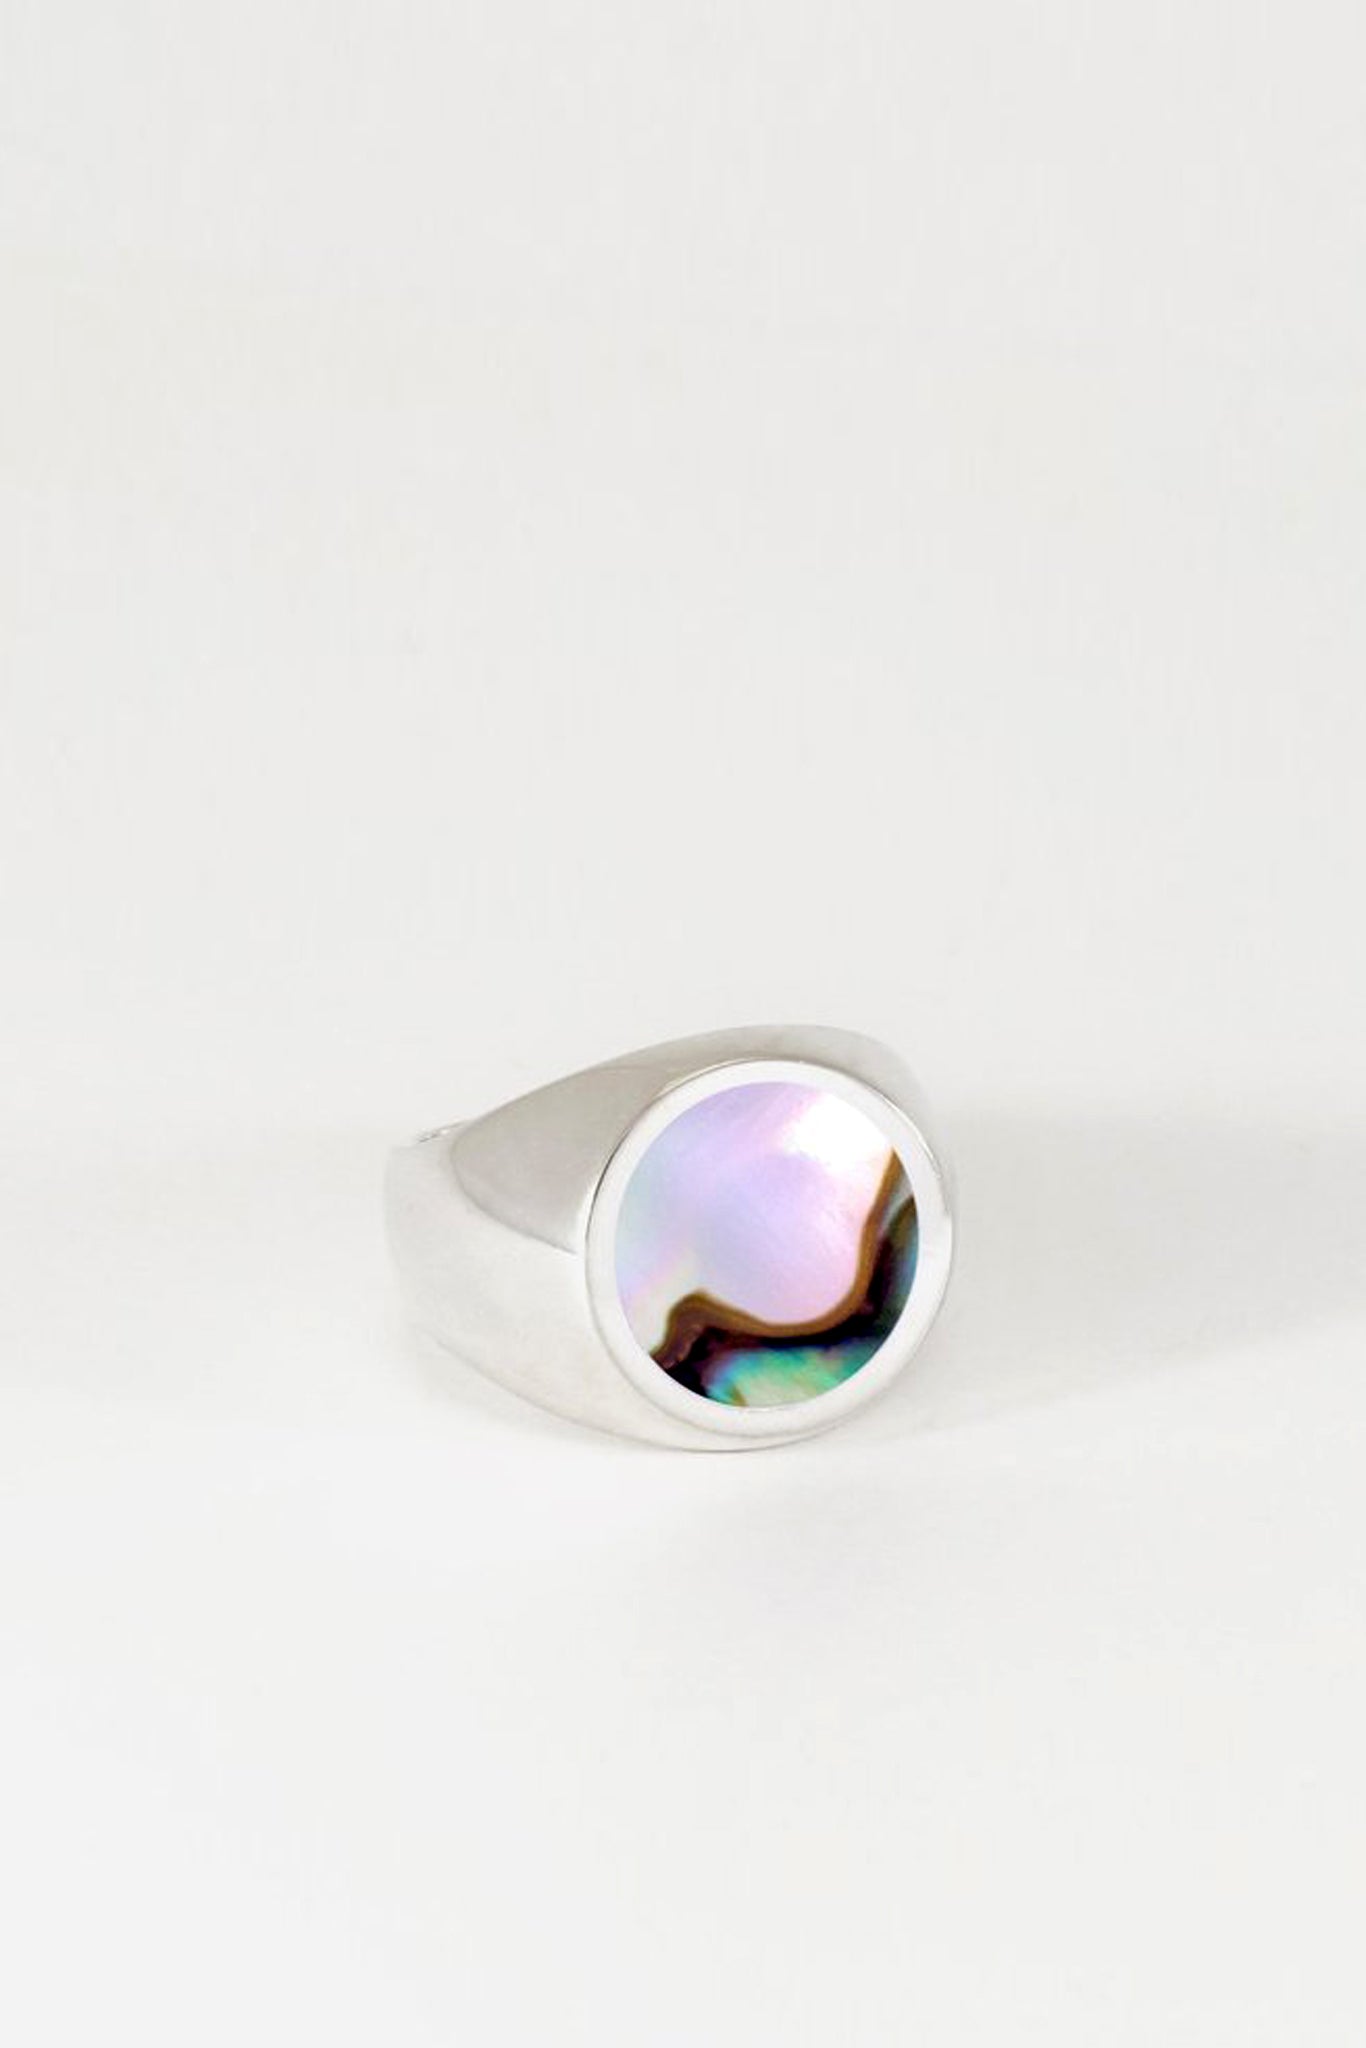 Silver Abalone Signet Ring - Round